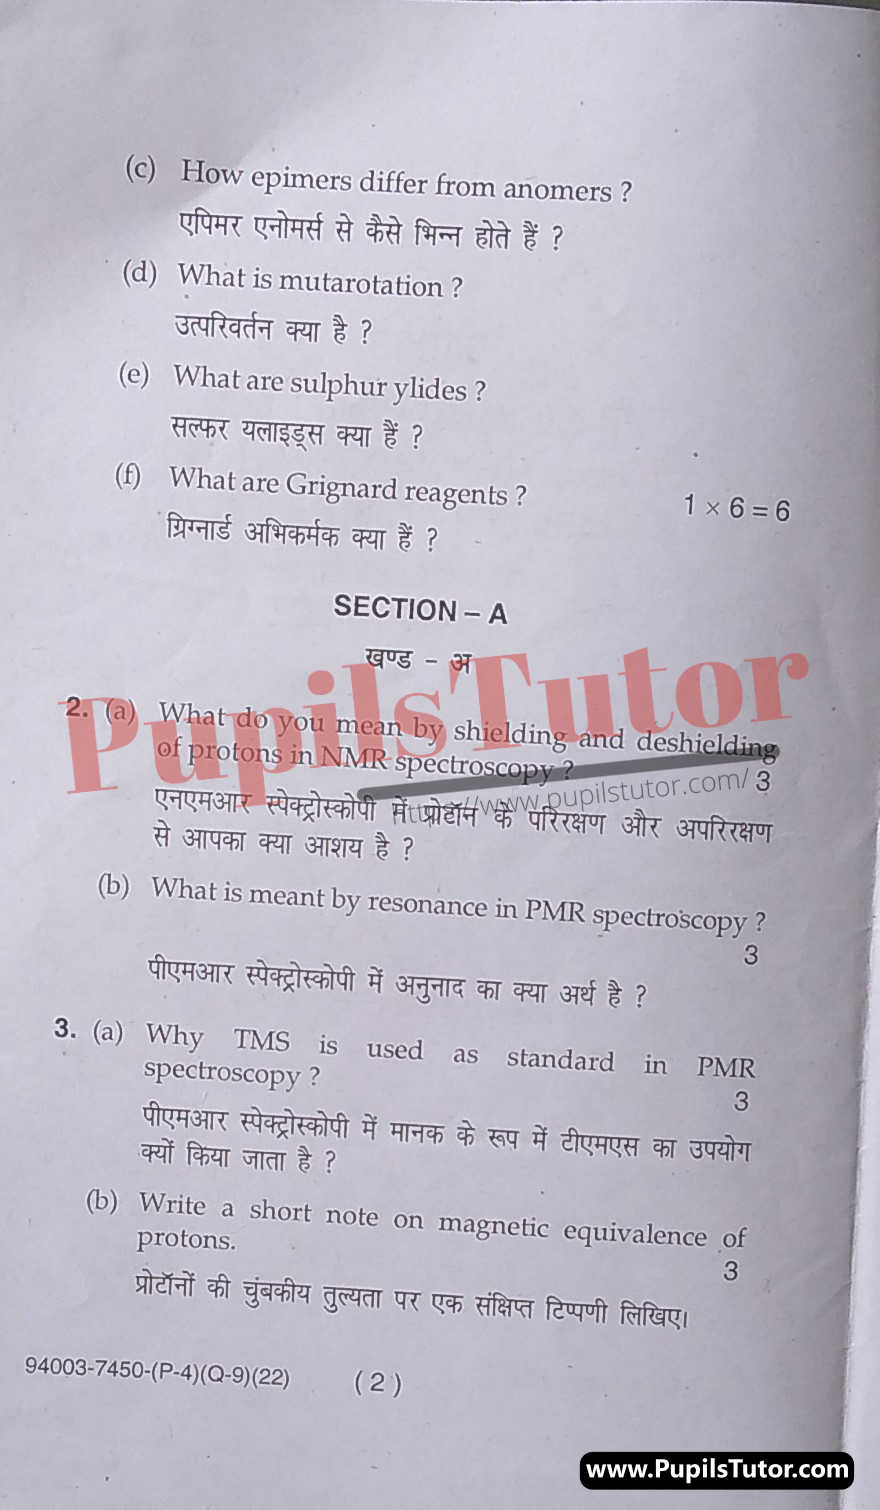 M.D. University B.Sc. [Chemistry] Organic Chemistry 5th Semester Important Question Answer And Solution - www.pupilstutor.com (Paper Page Number 2)